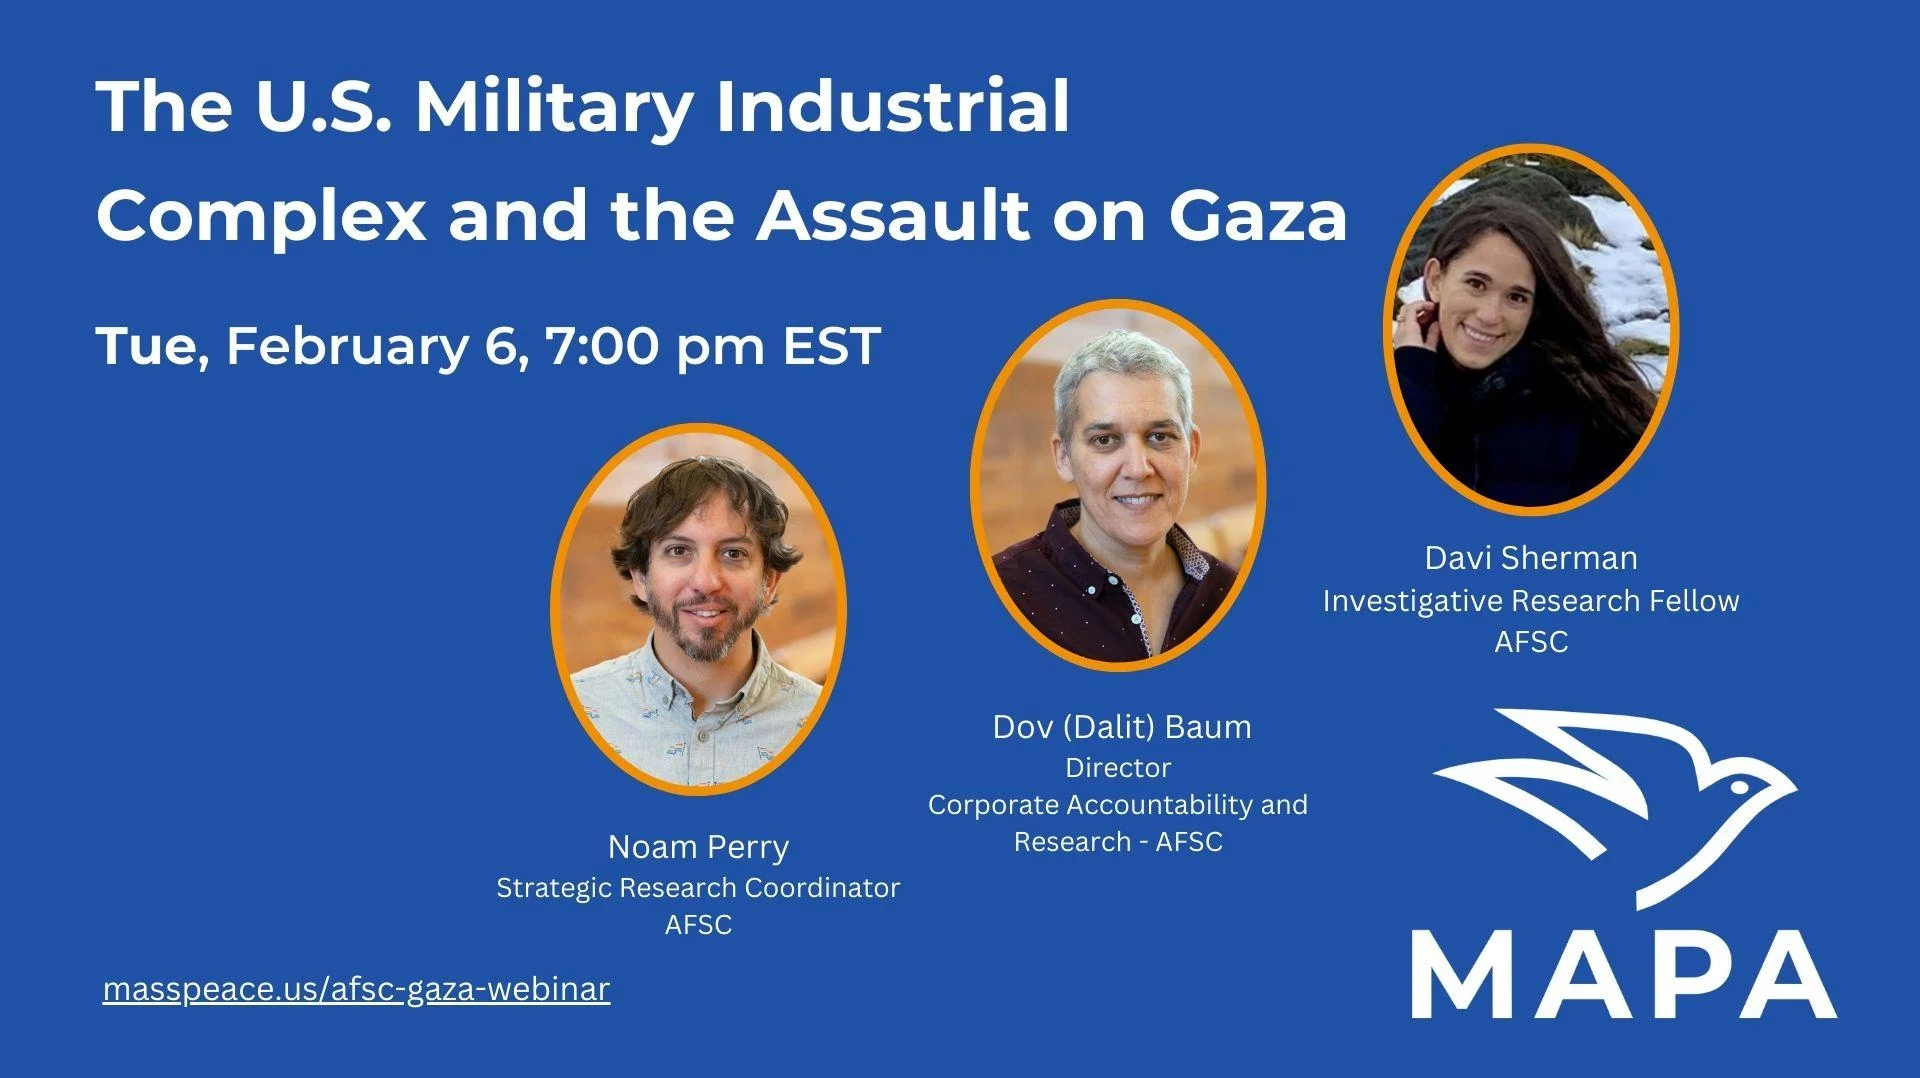  The U.S. Military Industrial Complex and the Assault on Gaza 